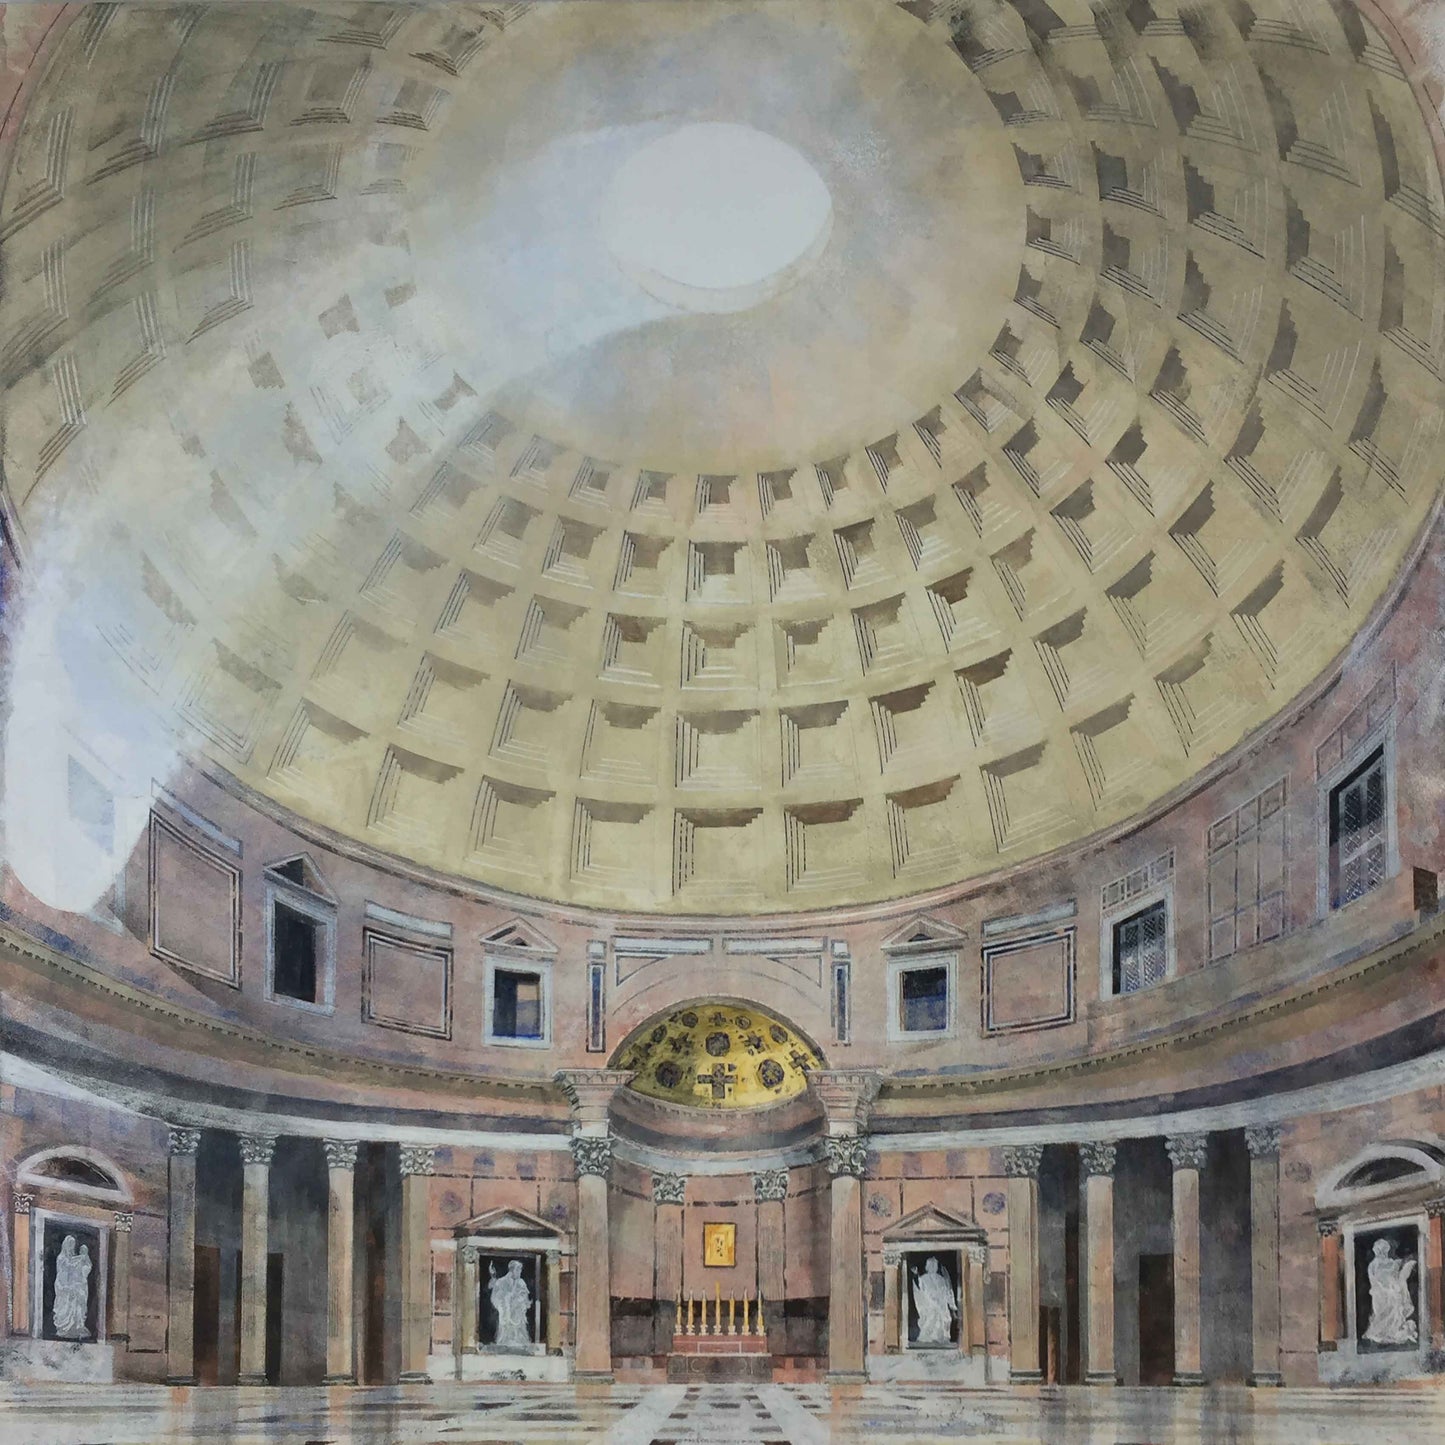 Wallpaper mural of the Interior dome of the Pantheon 250x250cm